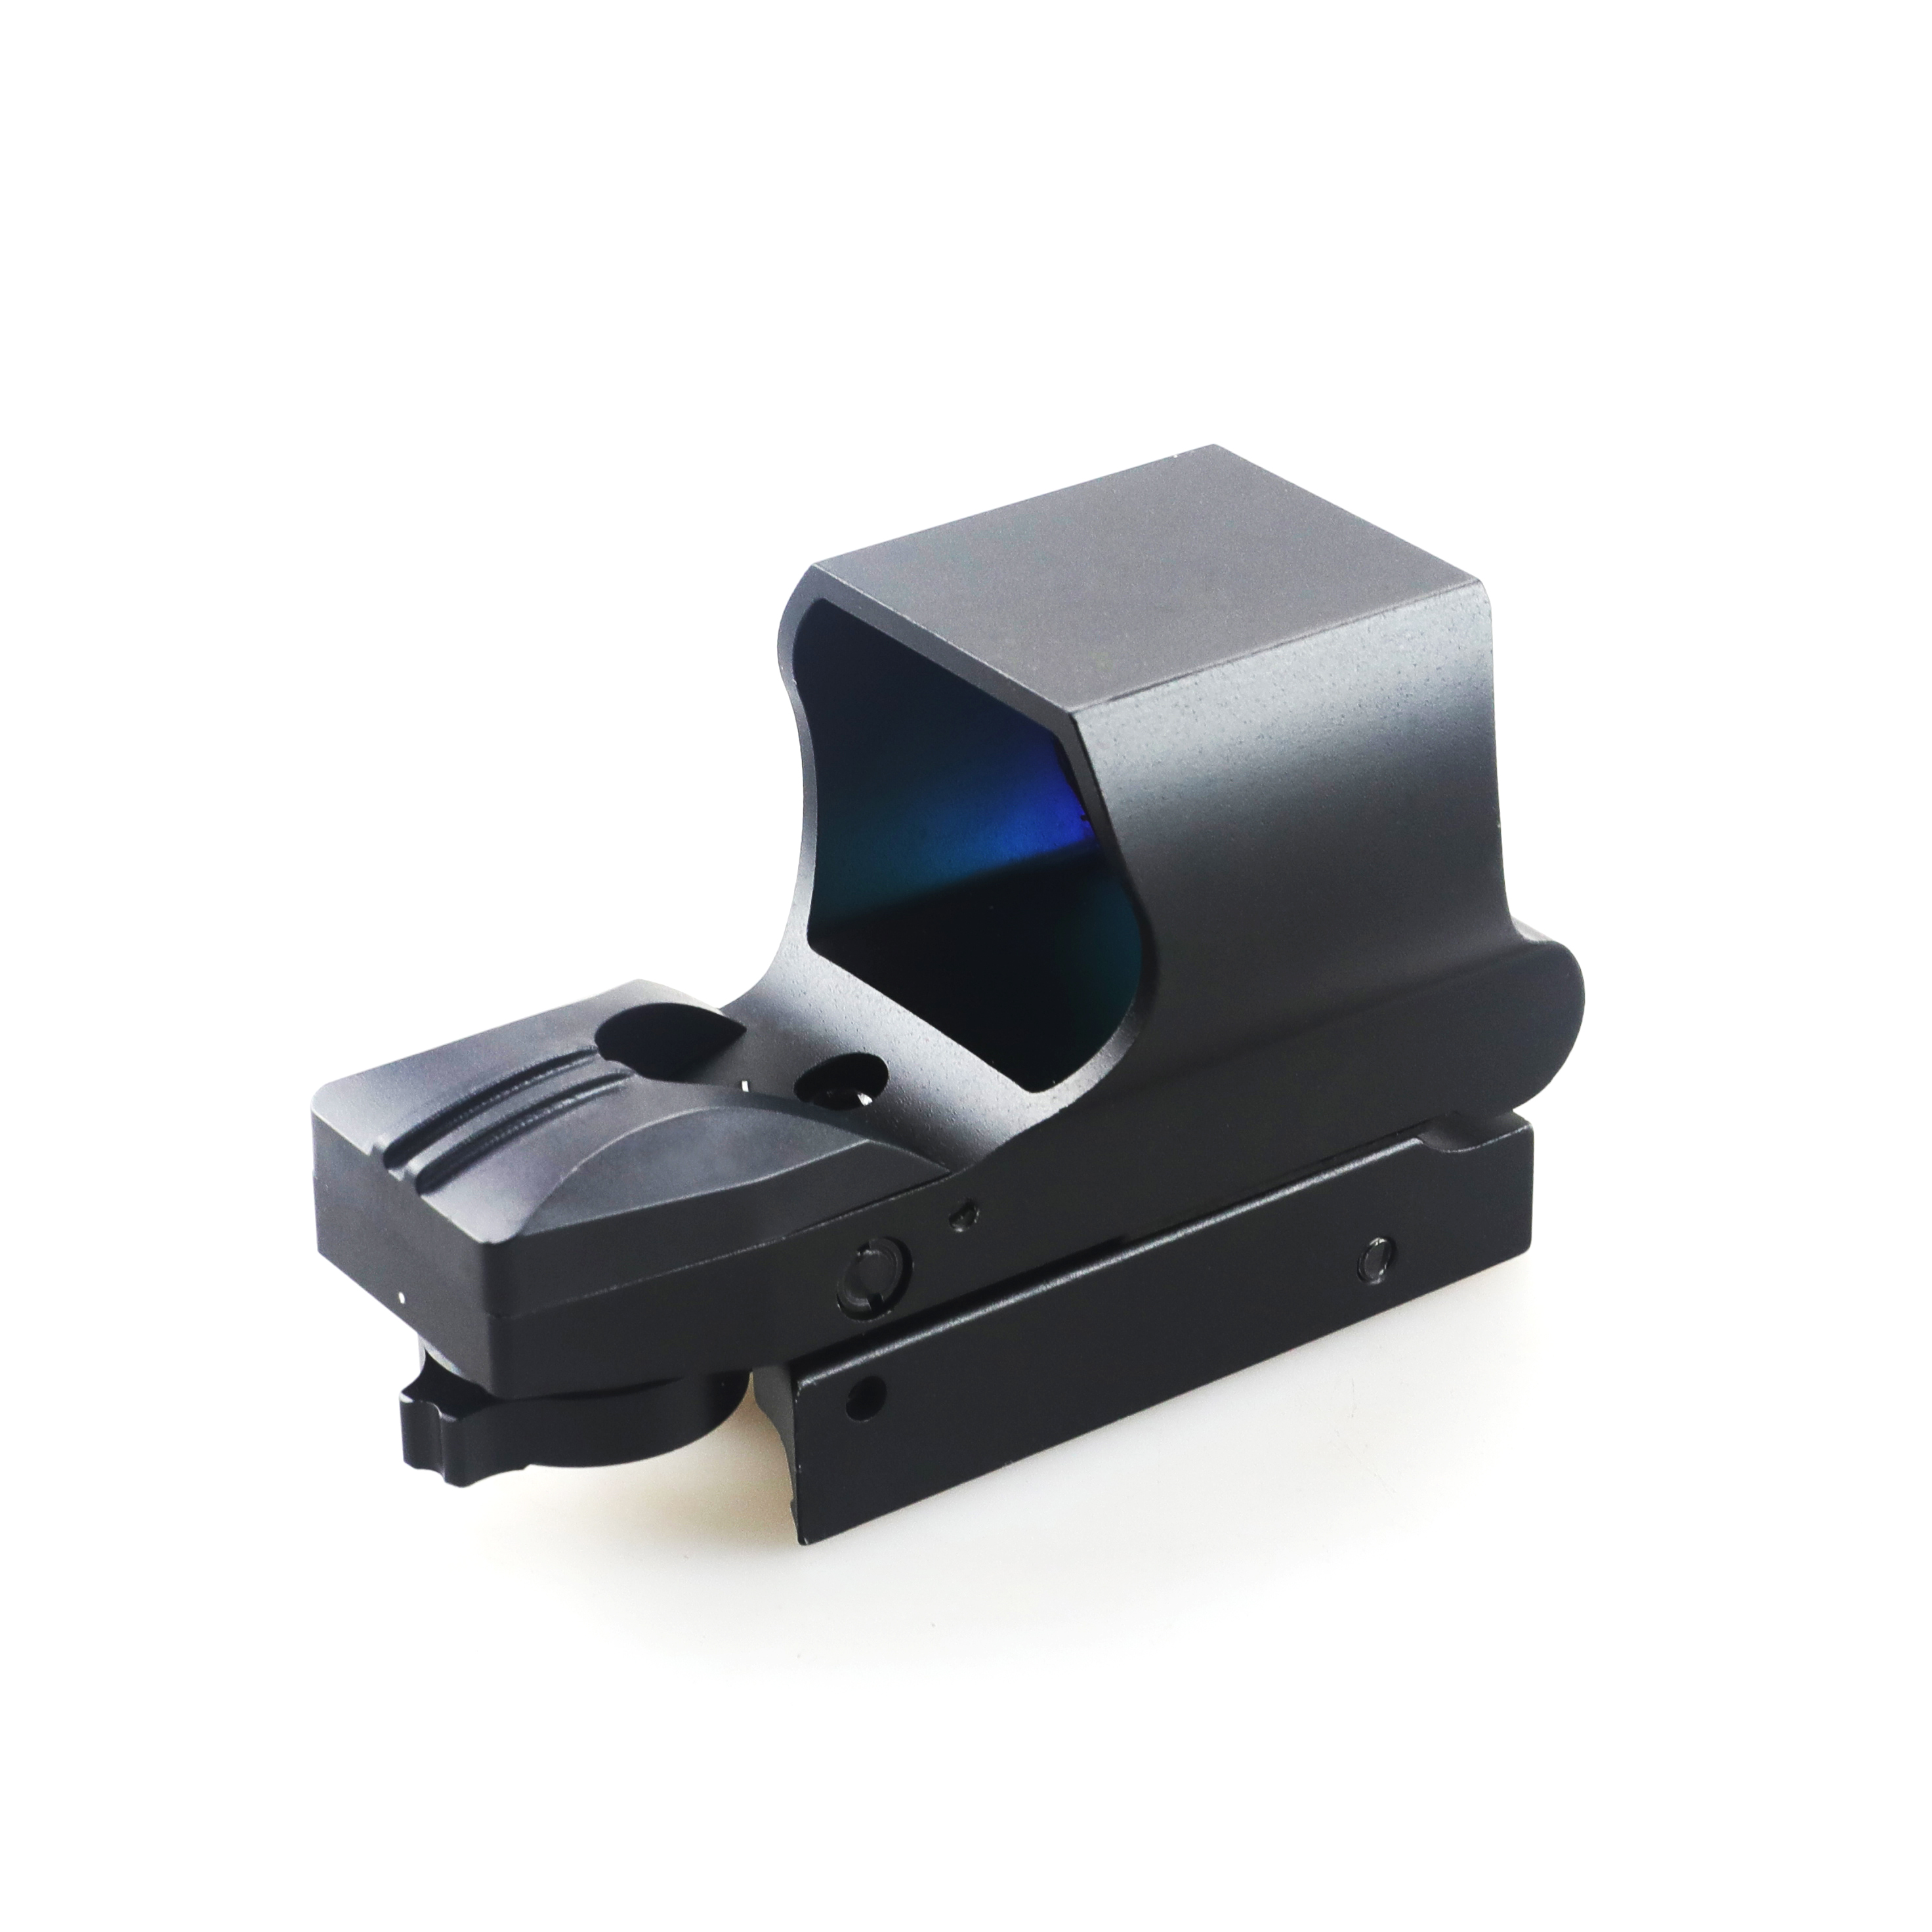 Reflex Sight, Multiple Reticle System Red Dot Sight with Picatinny Rail Mount